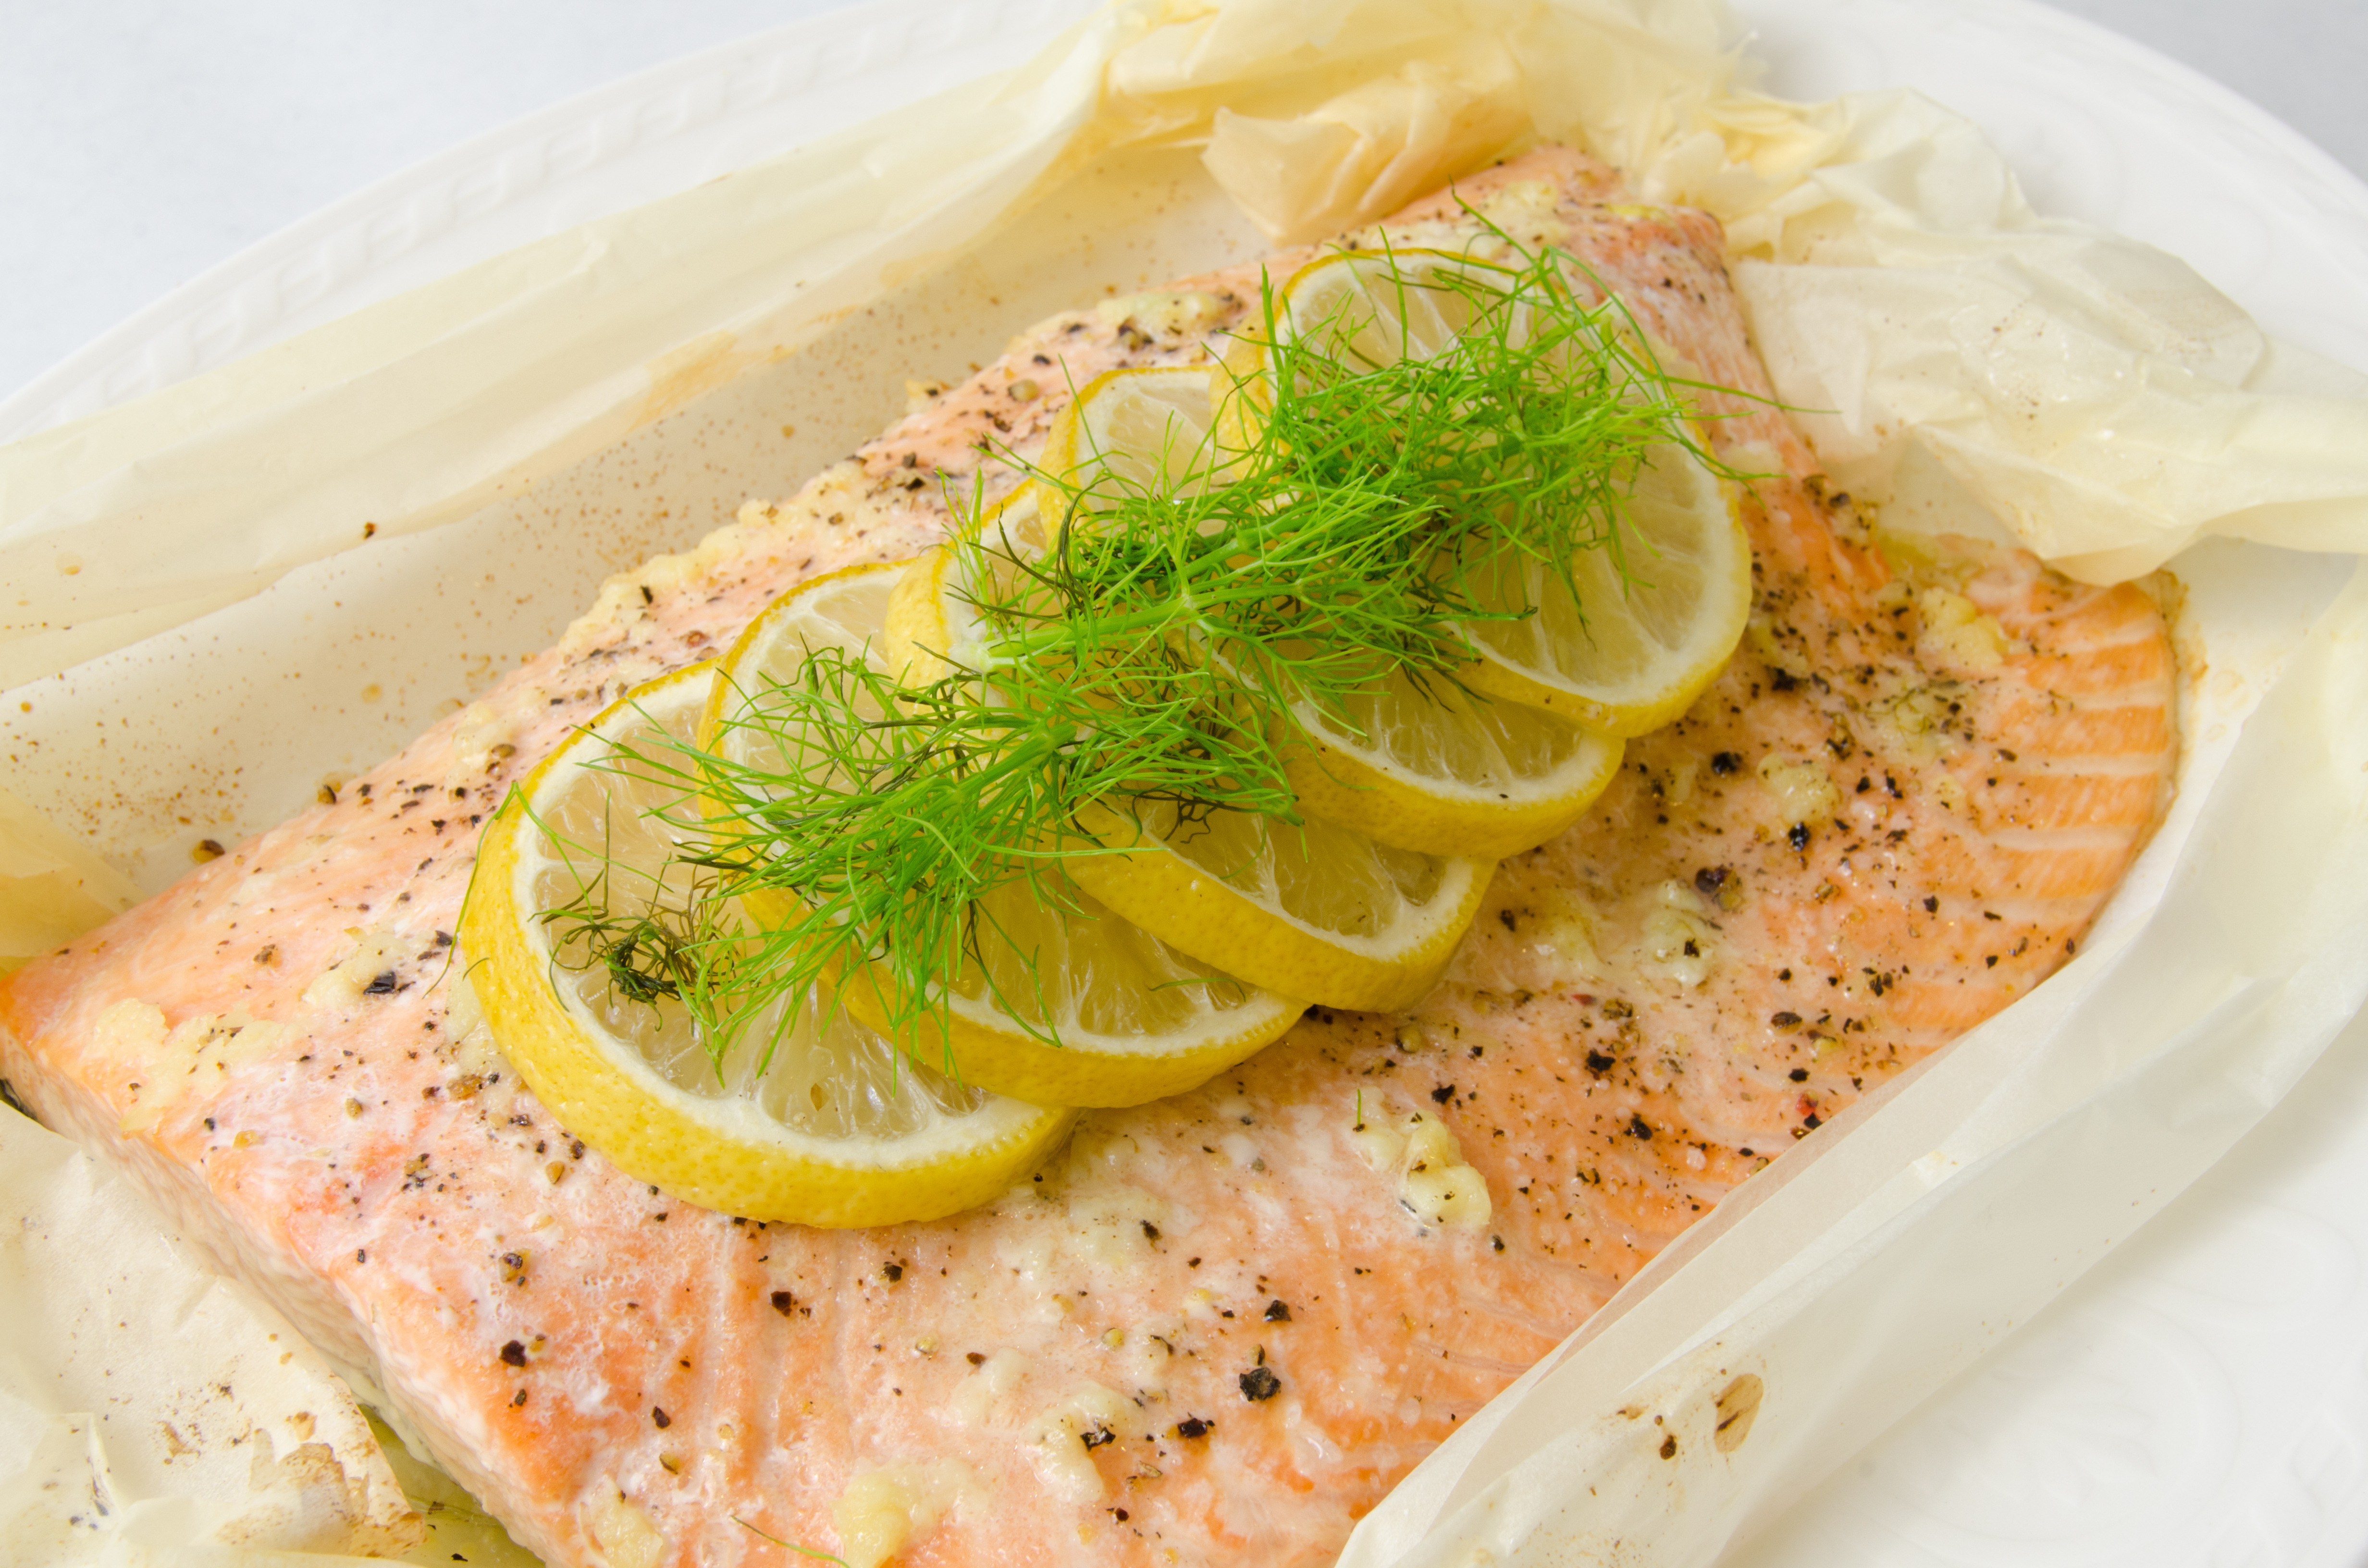 priority health personal wellness valentines day healthy meal salmon en papillote